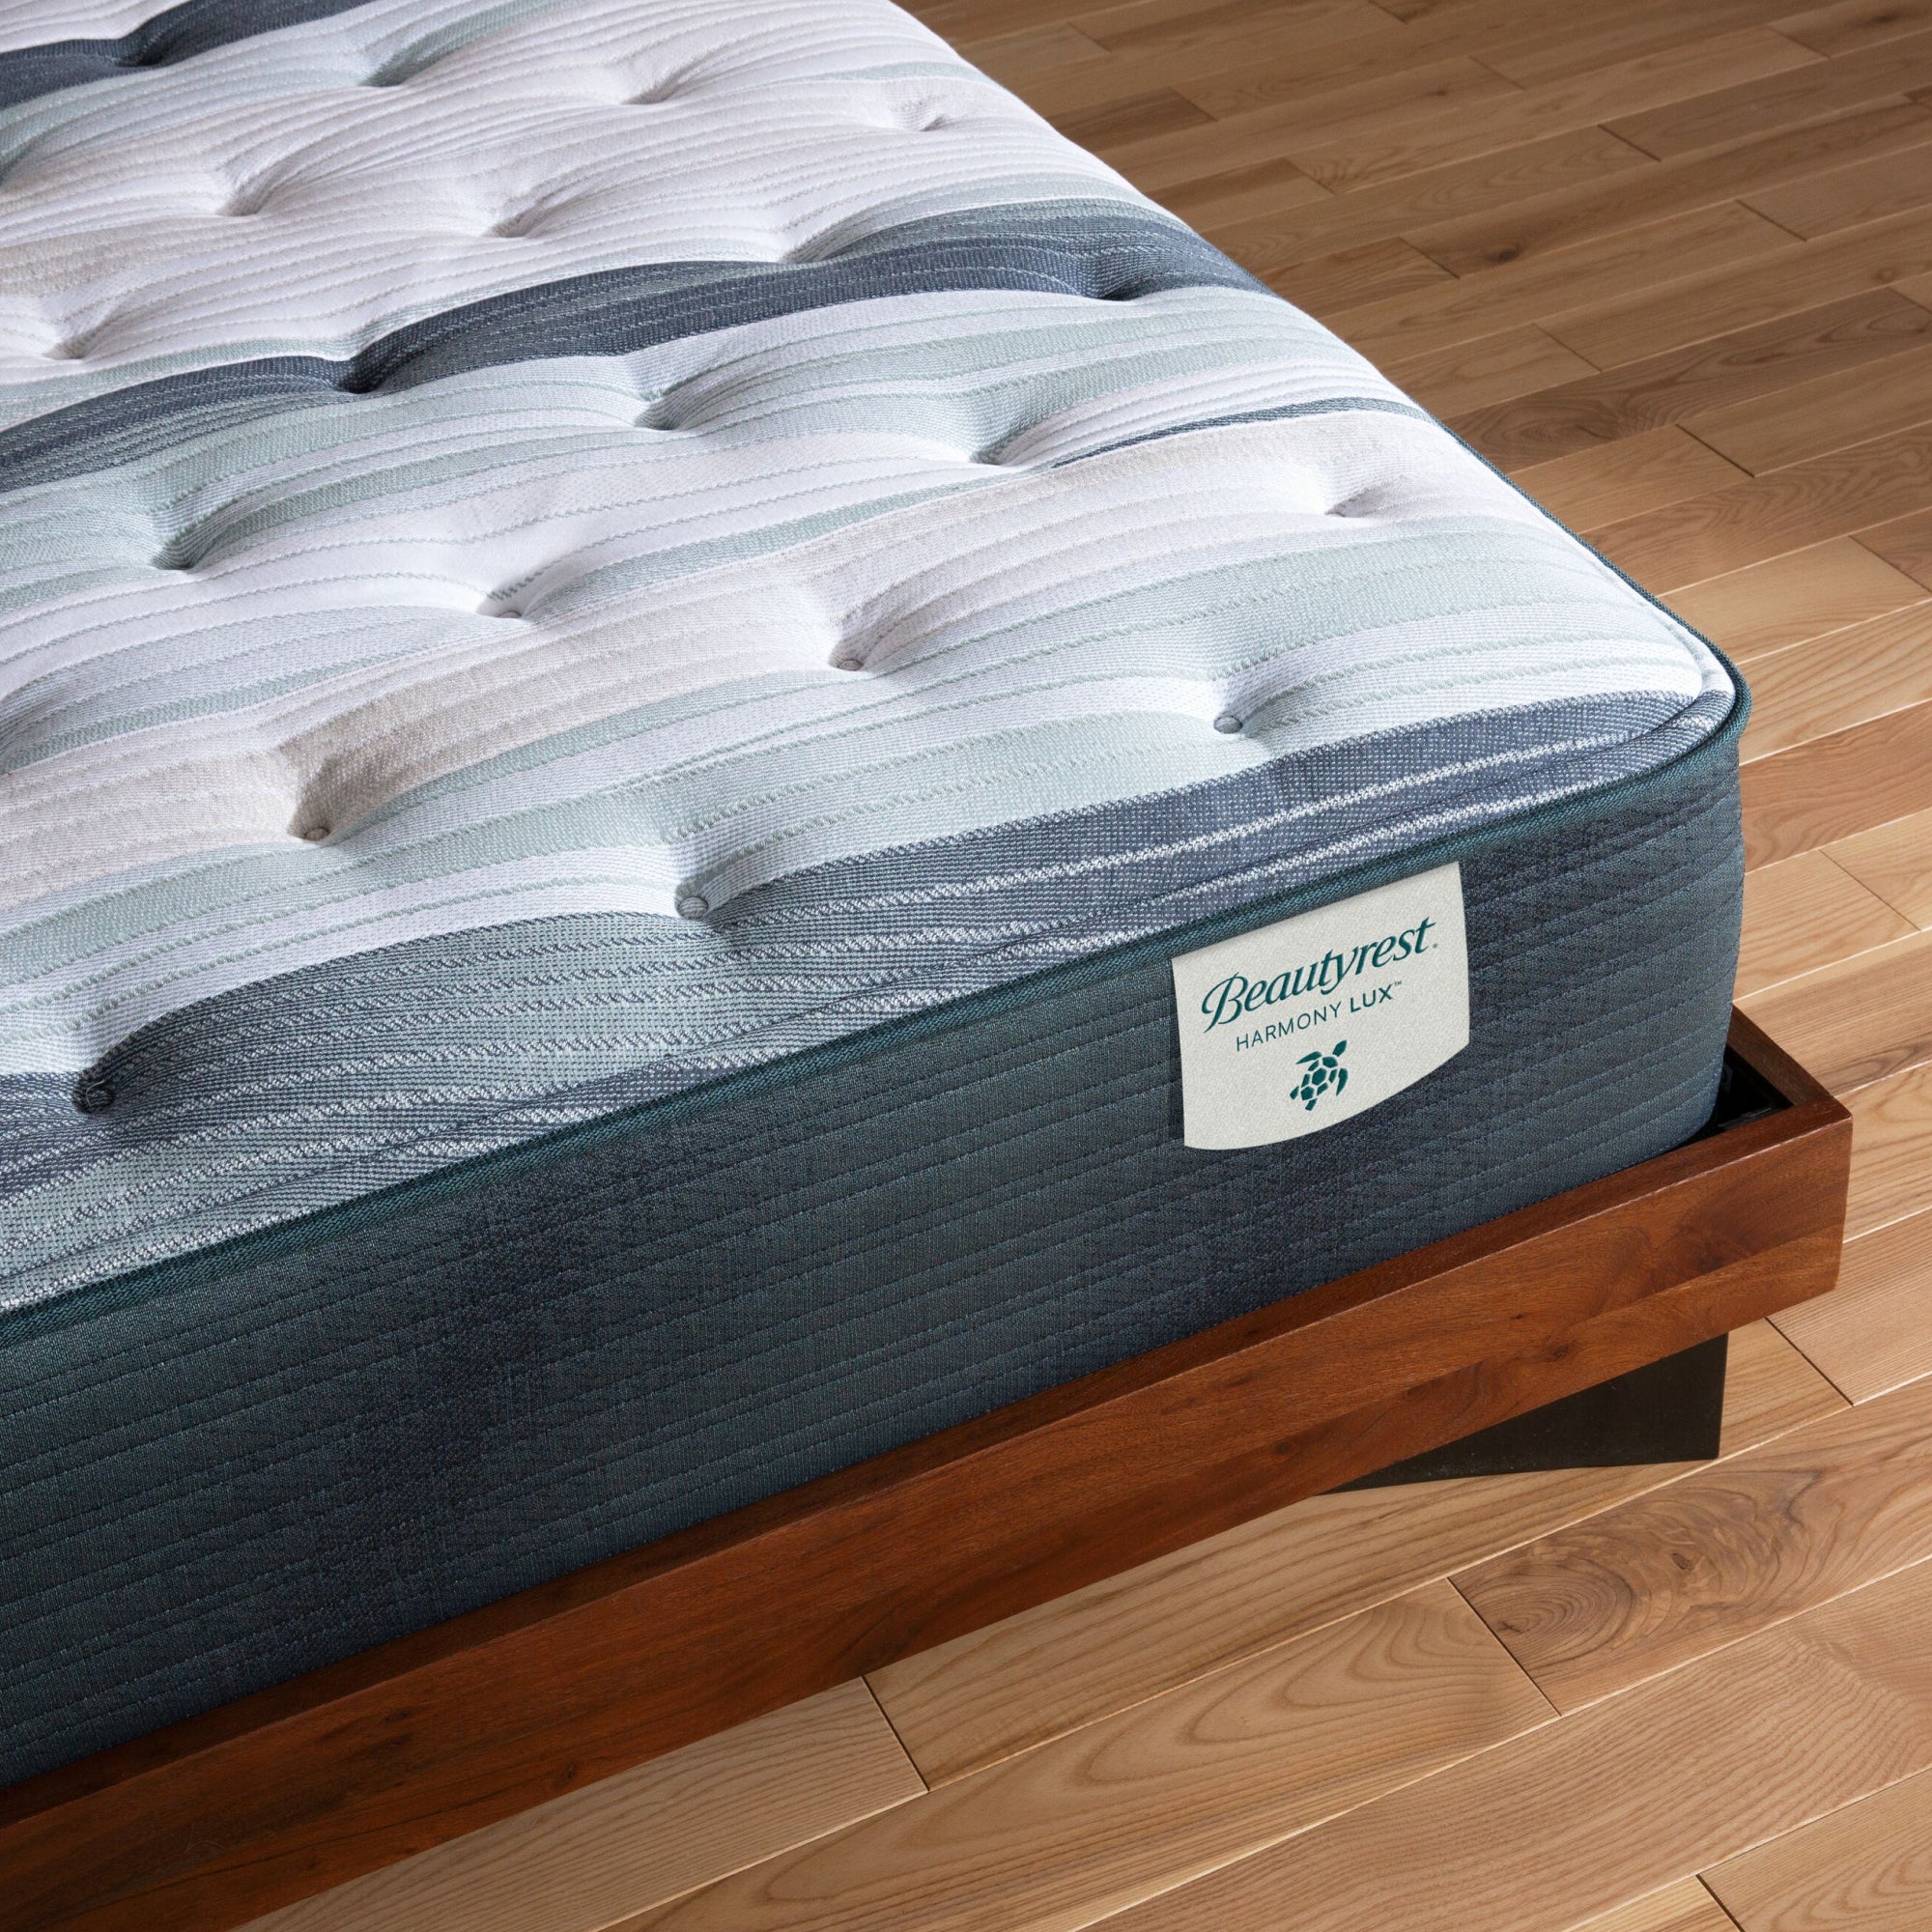 Corner view of the Beautyrest Harmony Lux mattress in a bedroom || series: Exceptional Coral Island || feel: medium